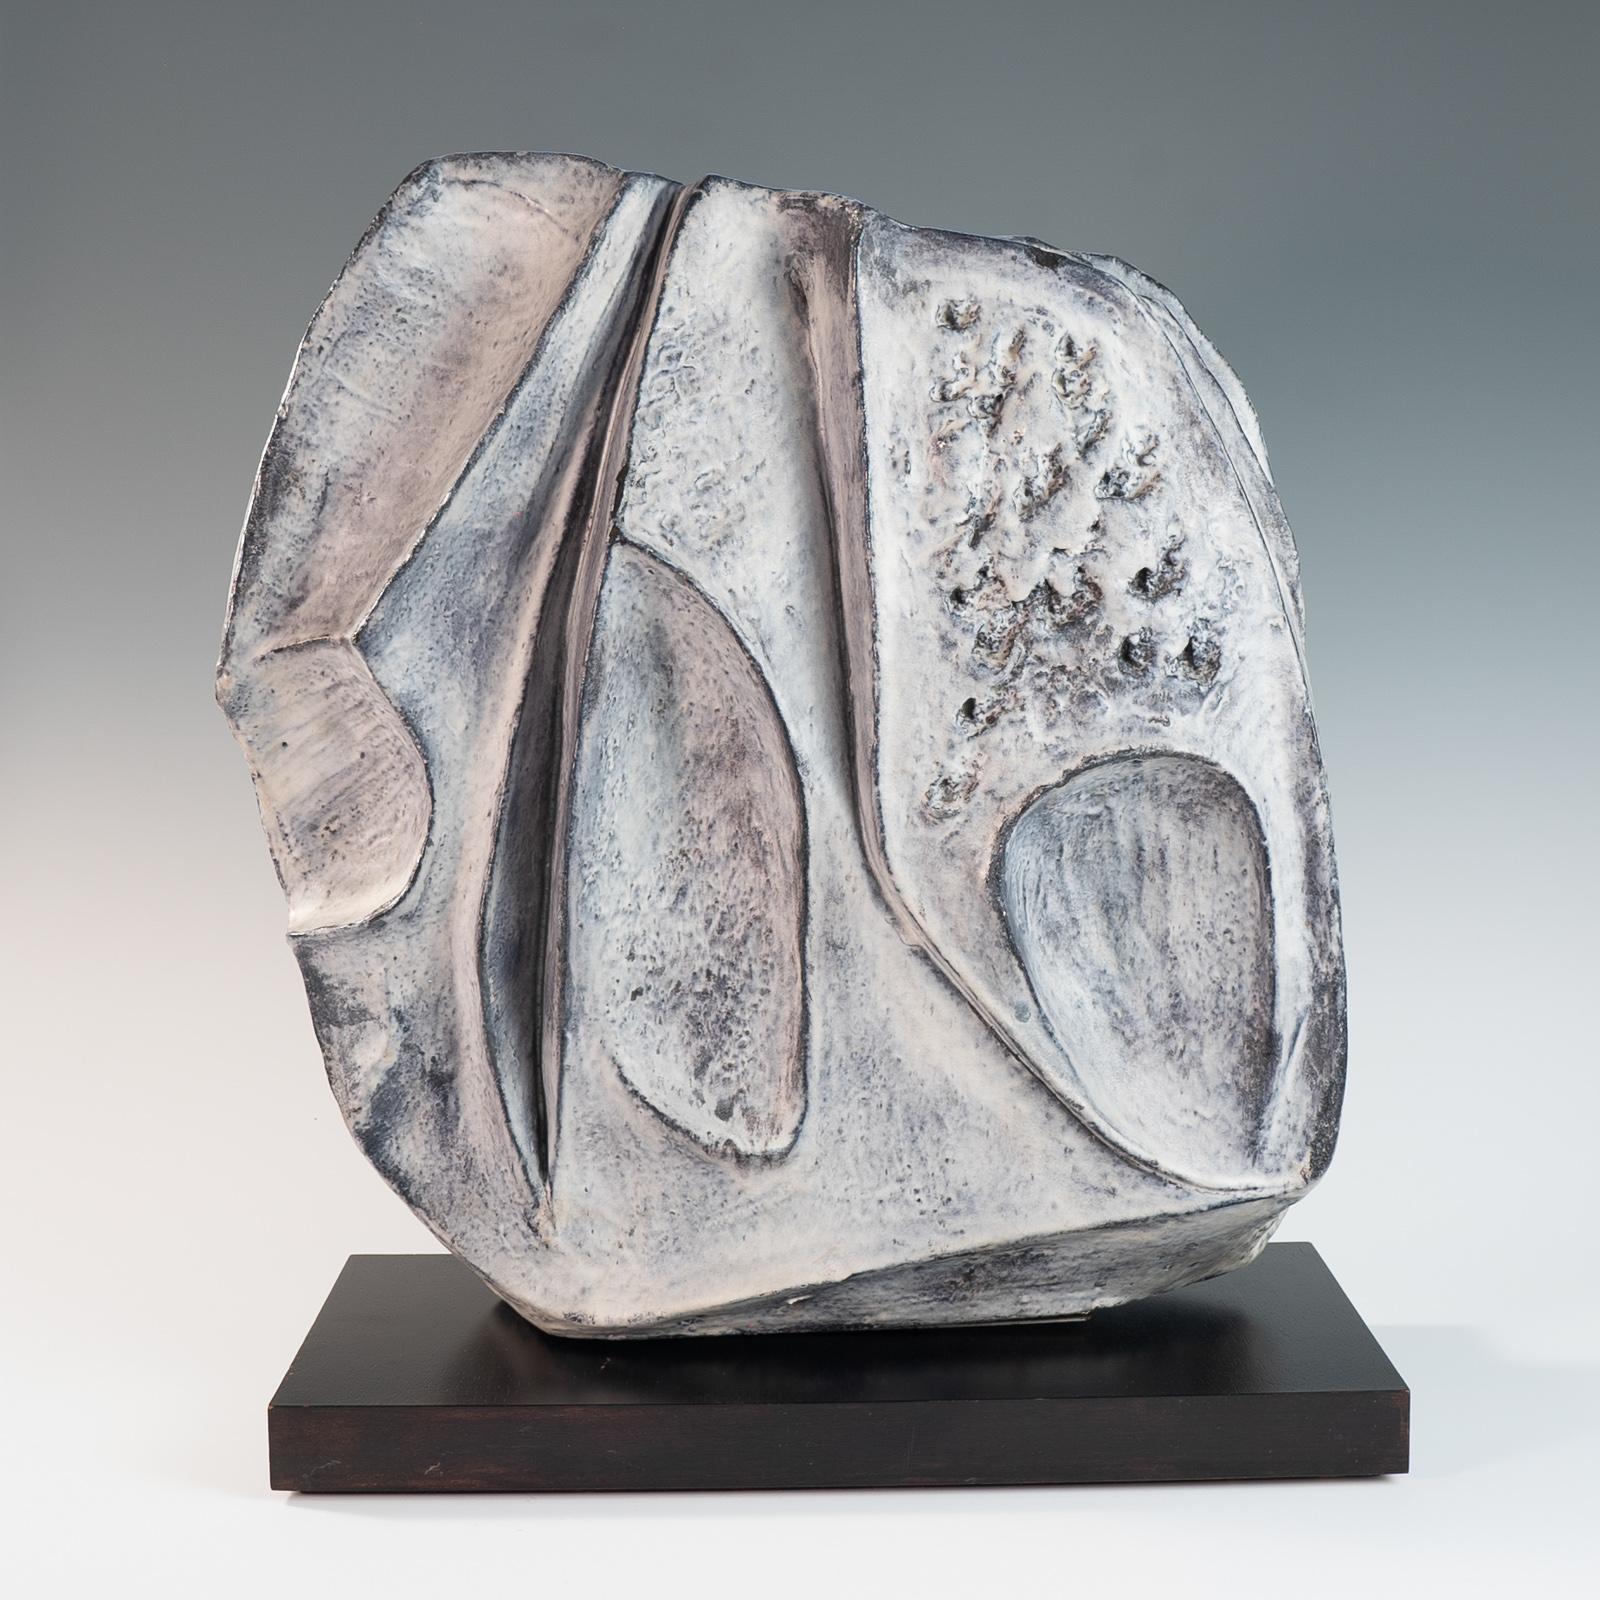 Superb large blue grey ceramic sculpture by Marcello Fantoni.

Signed to the underside by Fantoni himself, dated 1976,

Italy, circa 1976.

Provenance: sourced directly from the Fantoni family.